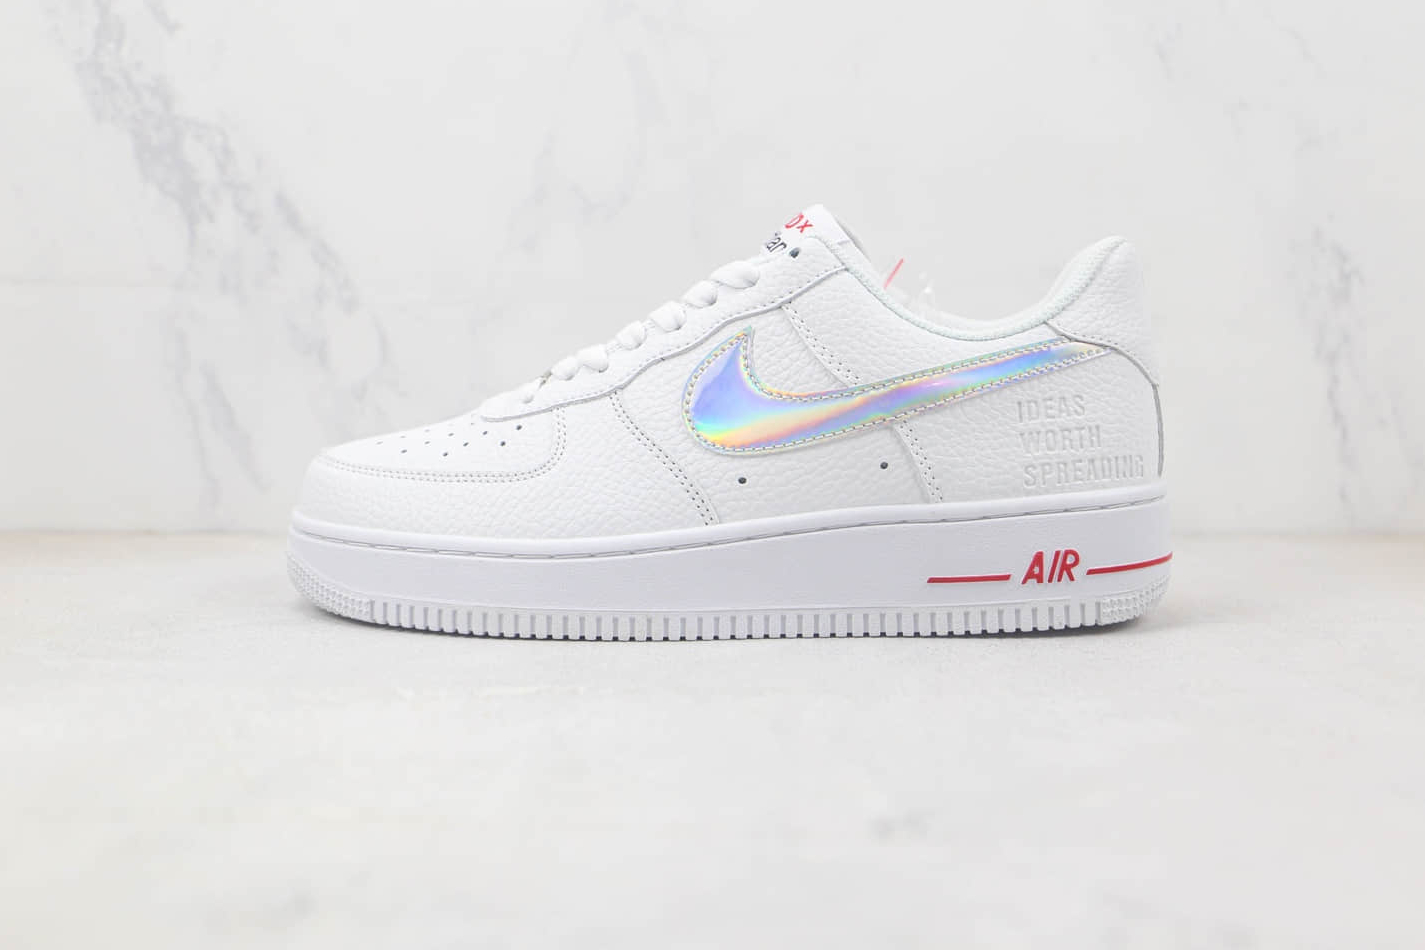 TED x Portland x Nike Air Force 1 07 Low White Multi-Color DD8959-705 - Limited Edition Collaboration